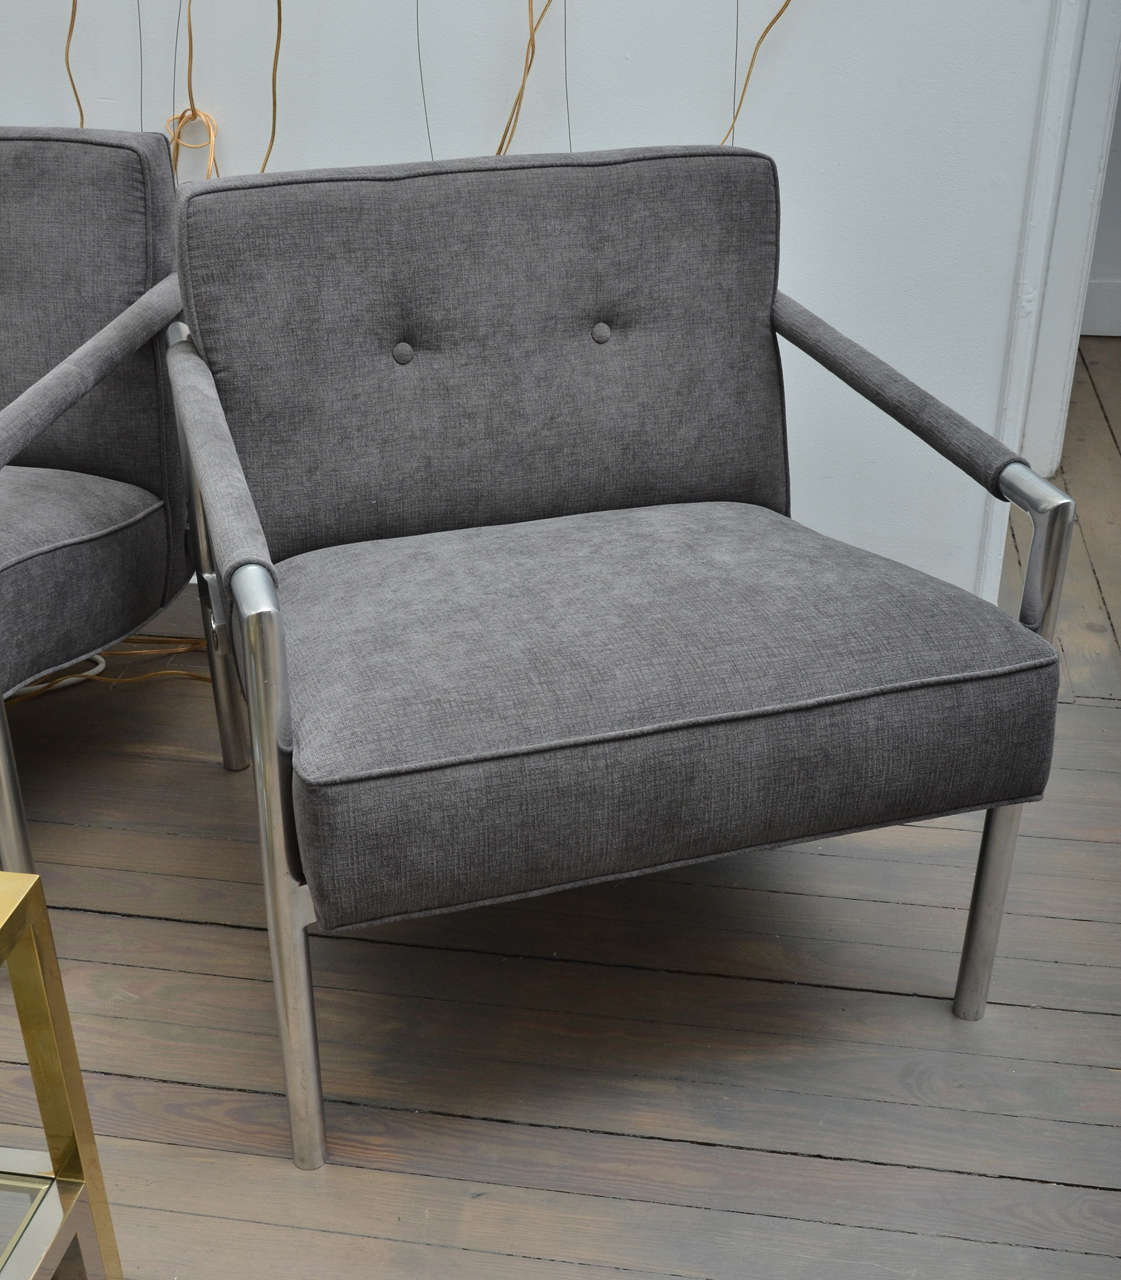 Pair of aluminum frame chairs upholstered in a soft grey corduroy in the style of Harvey Probber. Manufacturer, Founders Furniture Company.